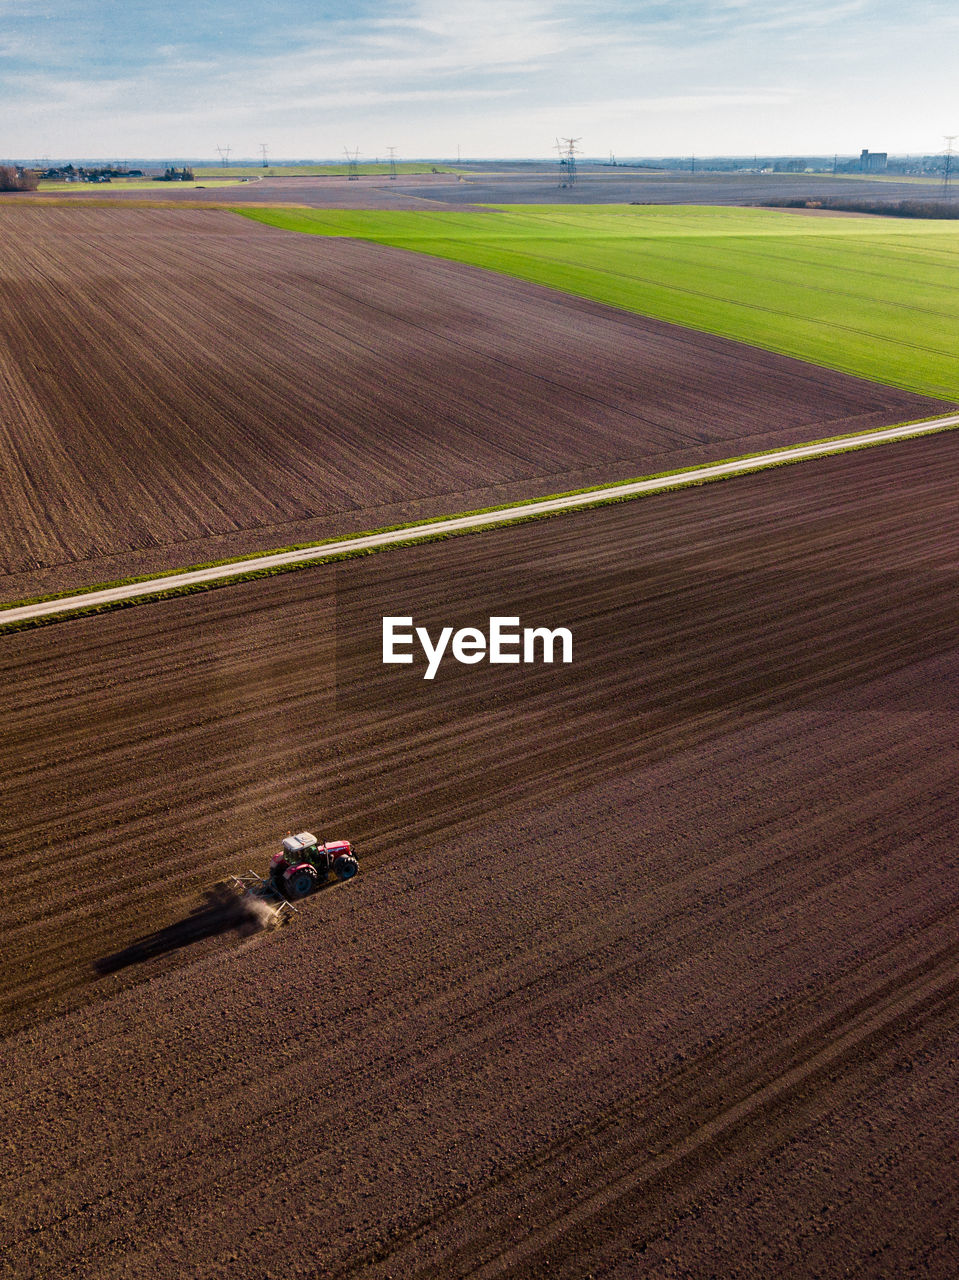 Aerial view of combine harvester on agricultural field